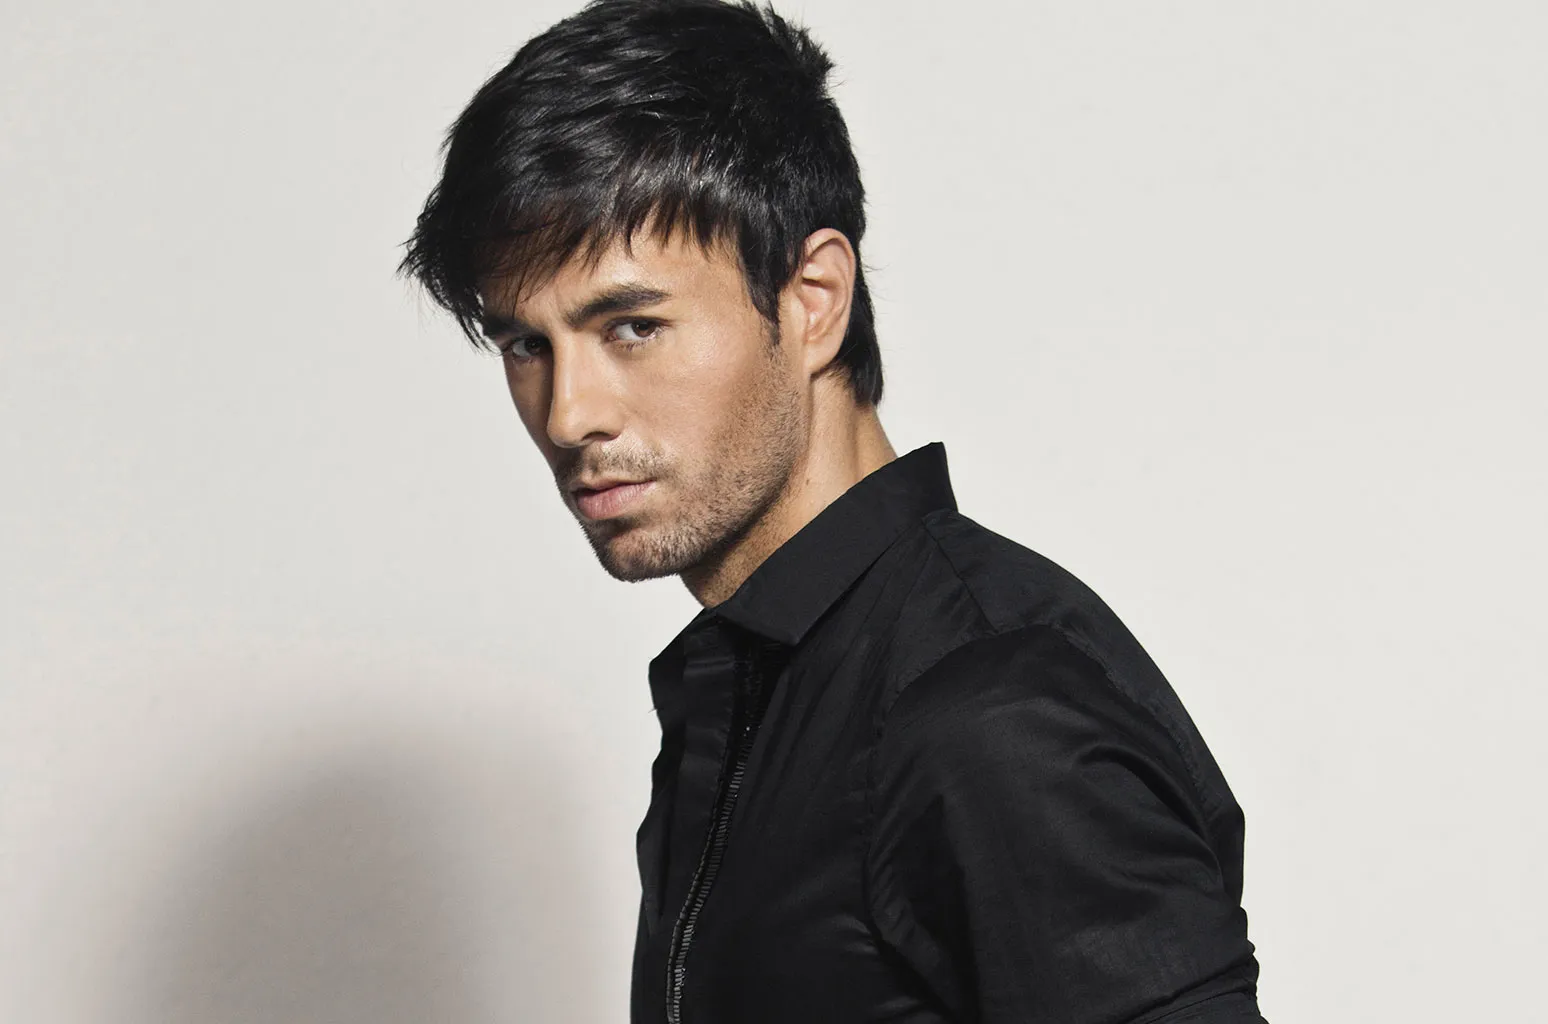 Enrique Iglesias's Tearful Tribute to Singer Aaliyah Caught on Camera During 'Hero' Video Shoot